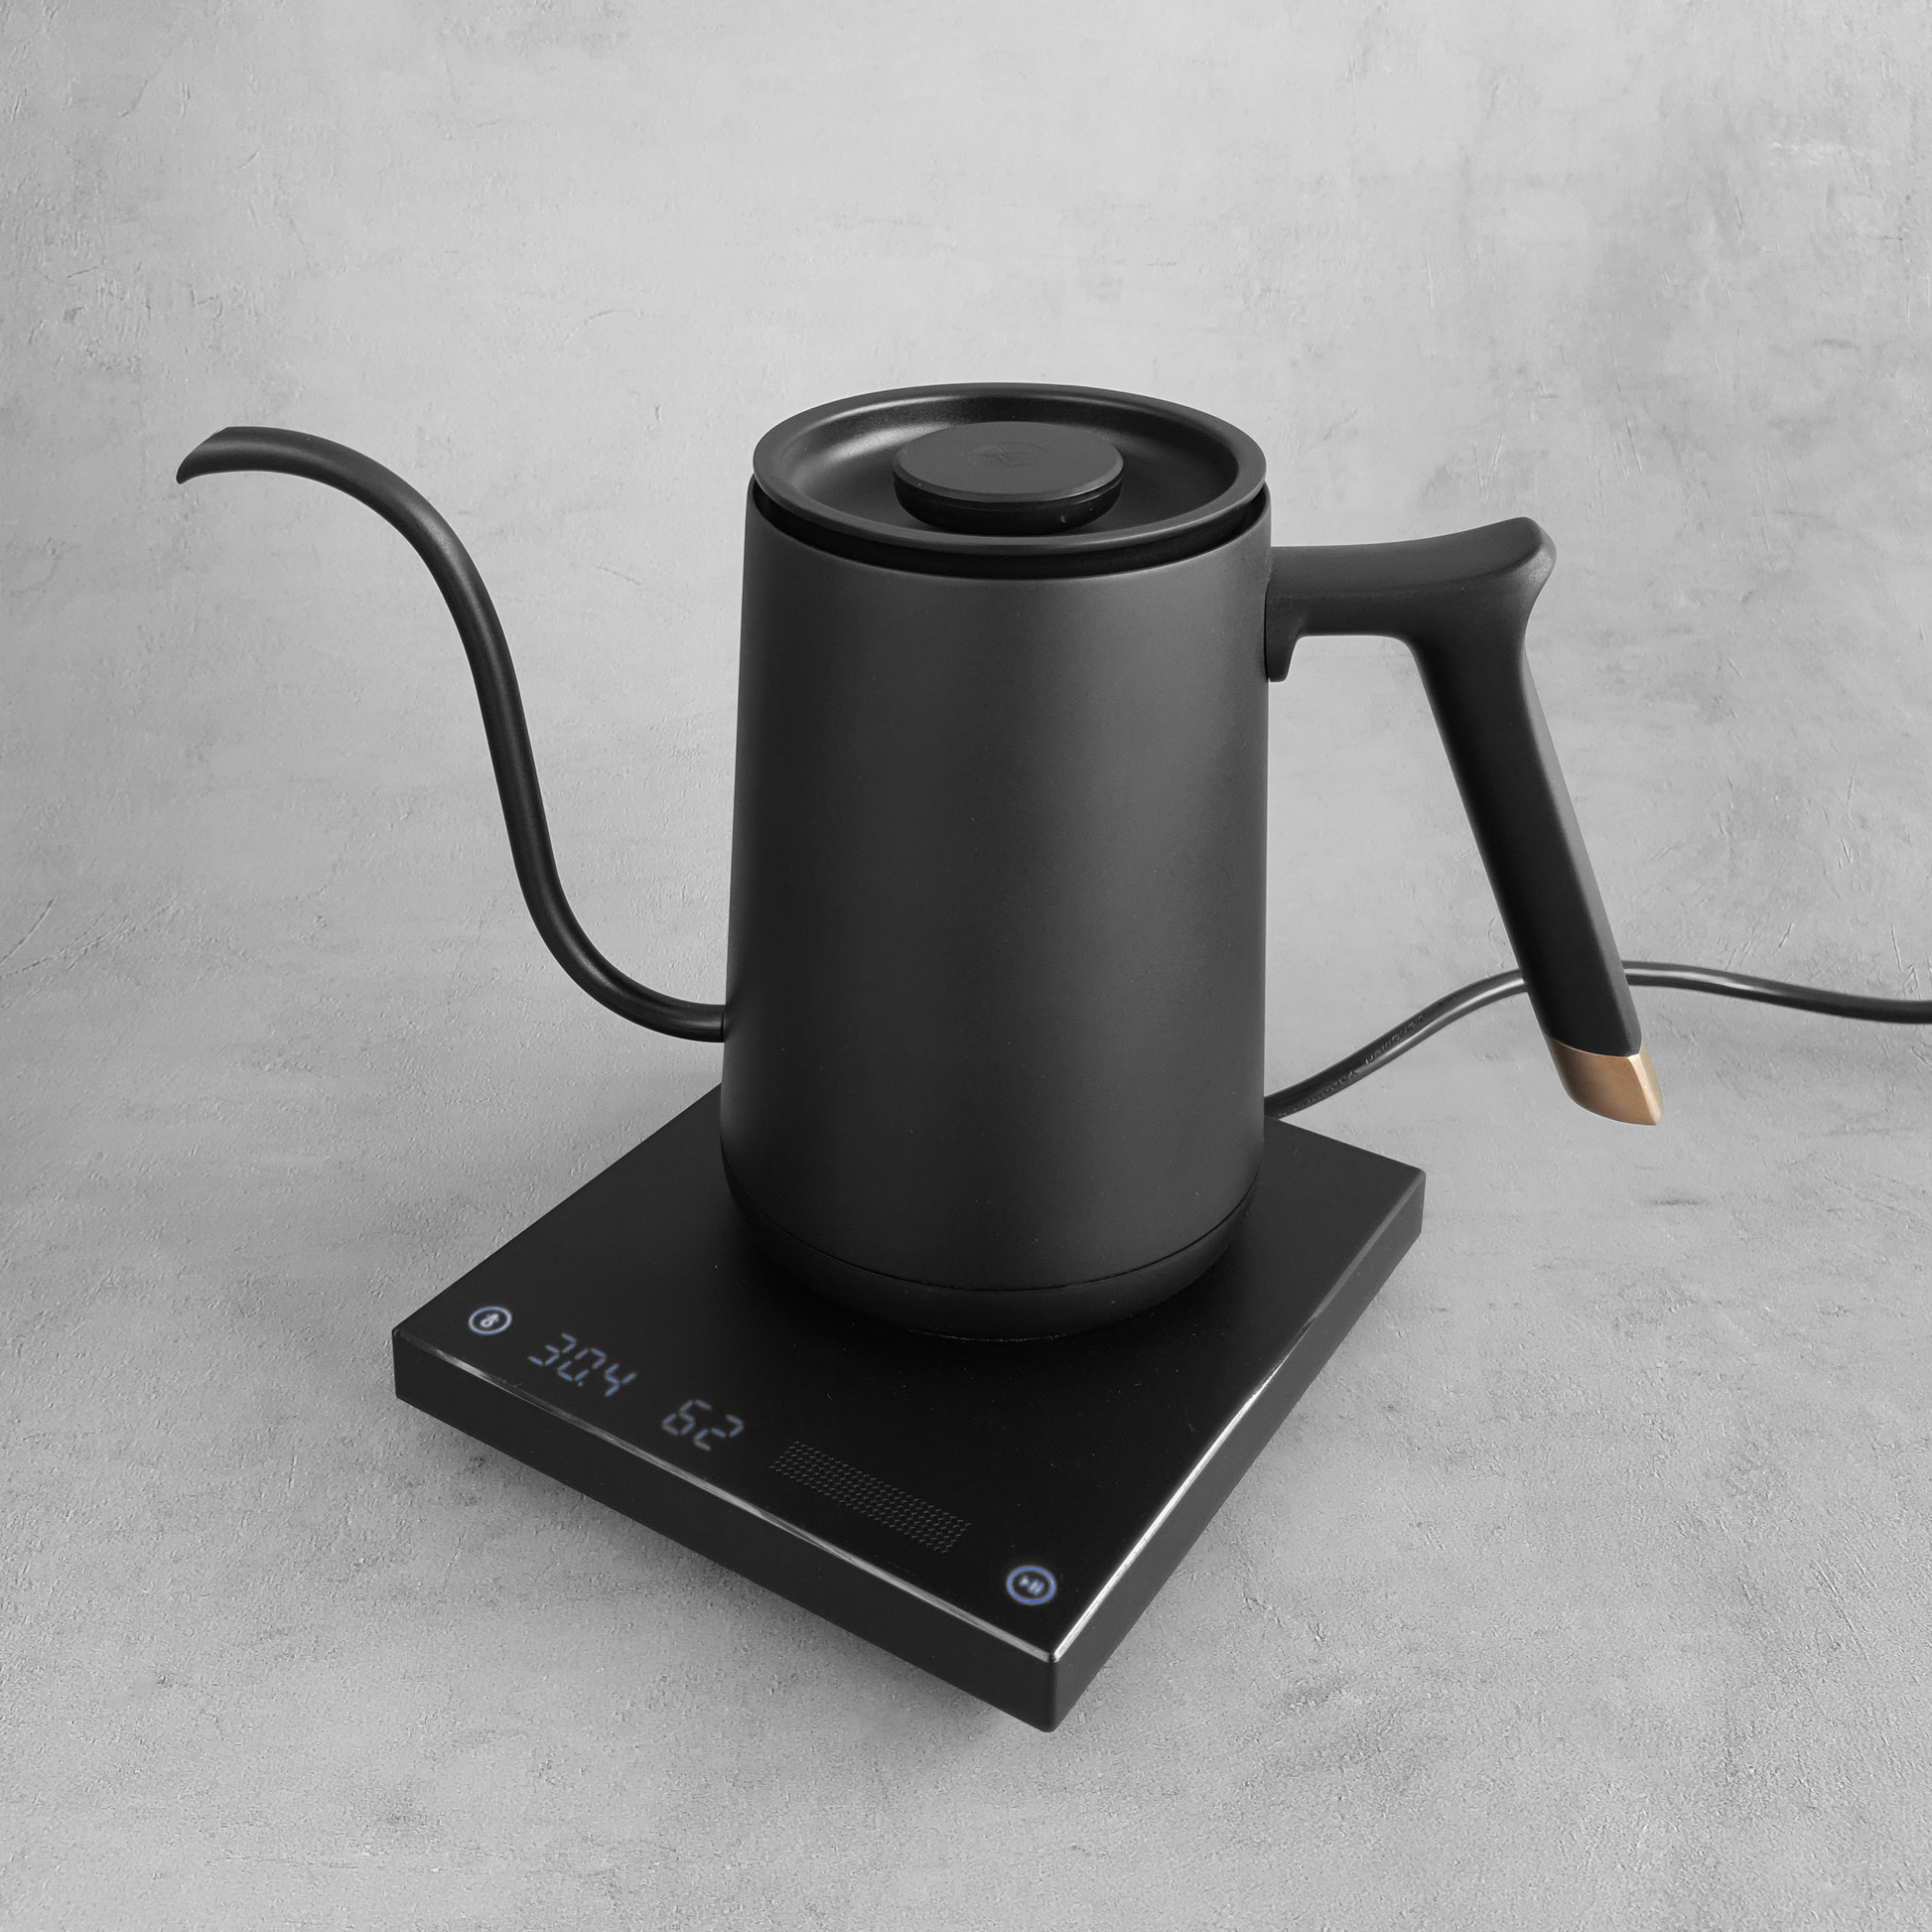 Timemore Fish Smart Thin electric kettle - 800 ml - white